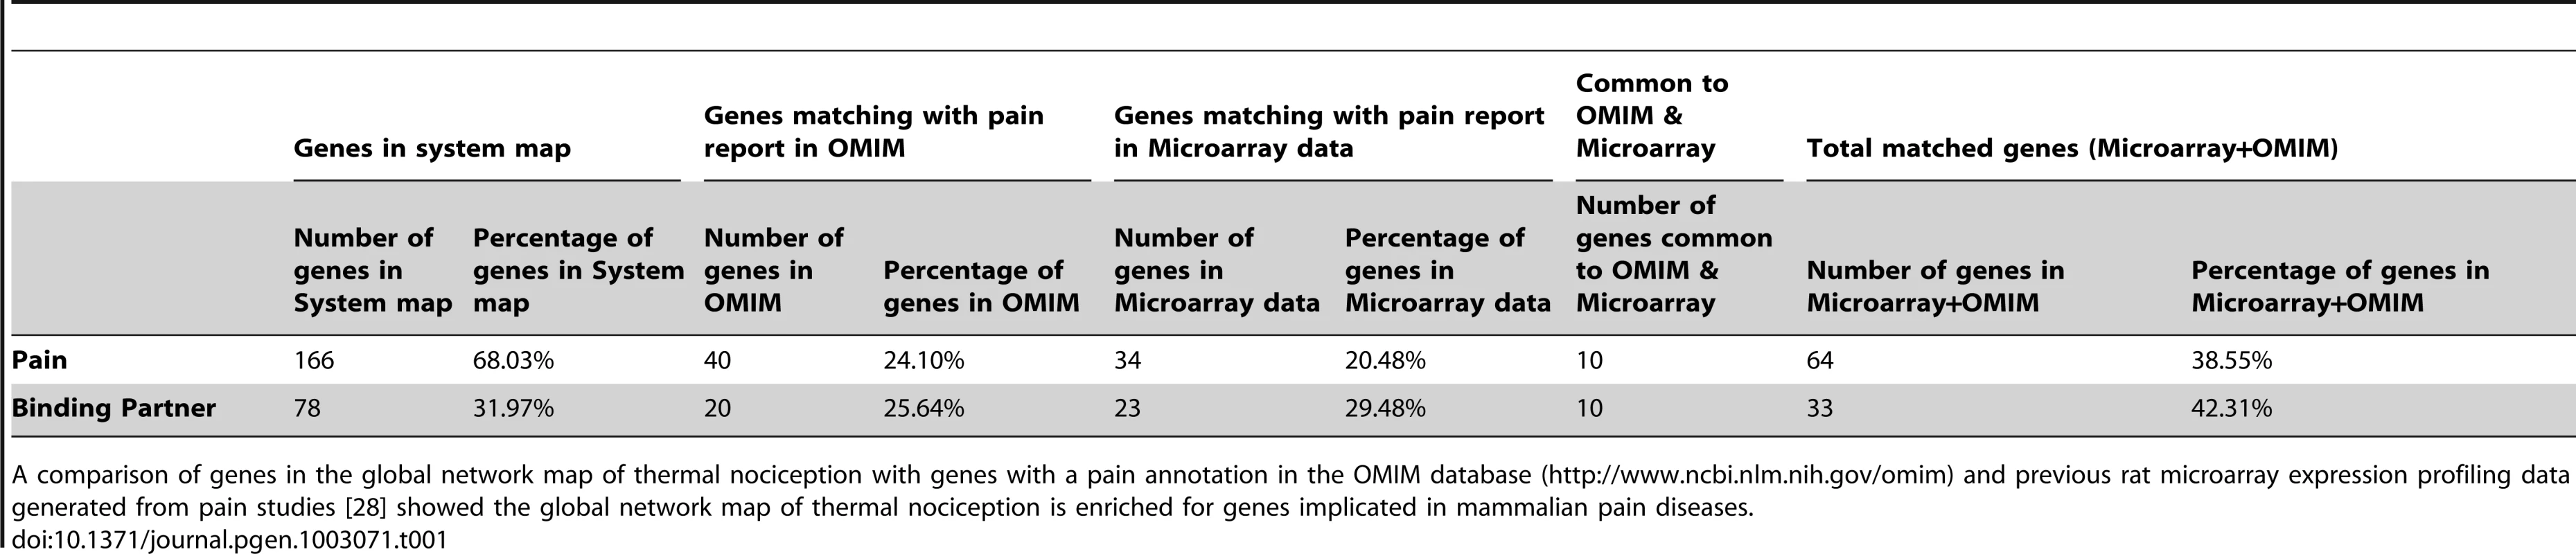 Comparison of systems map with microarray and OMIM data for pain.